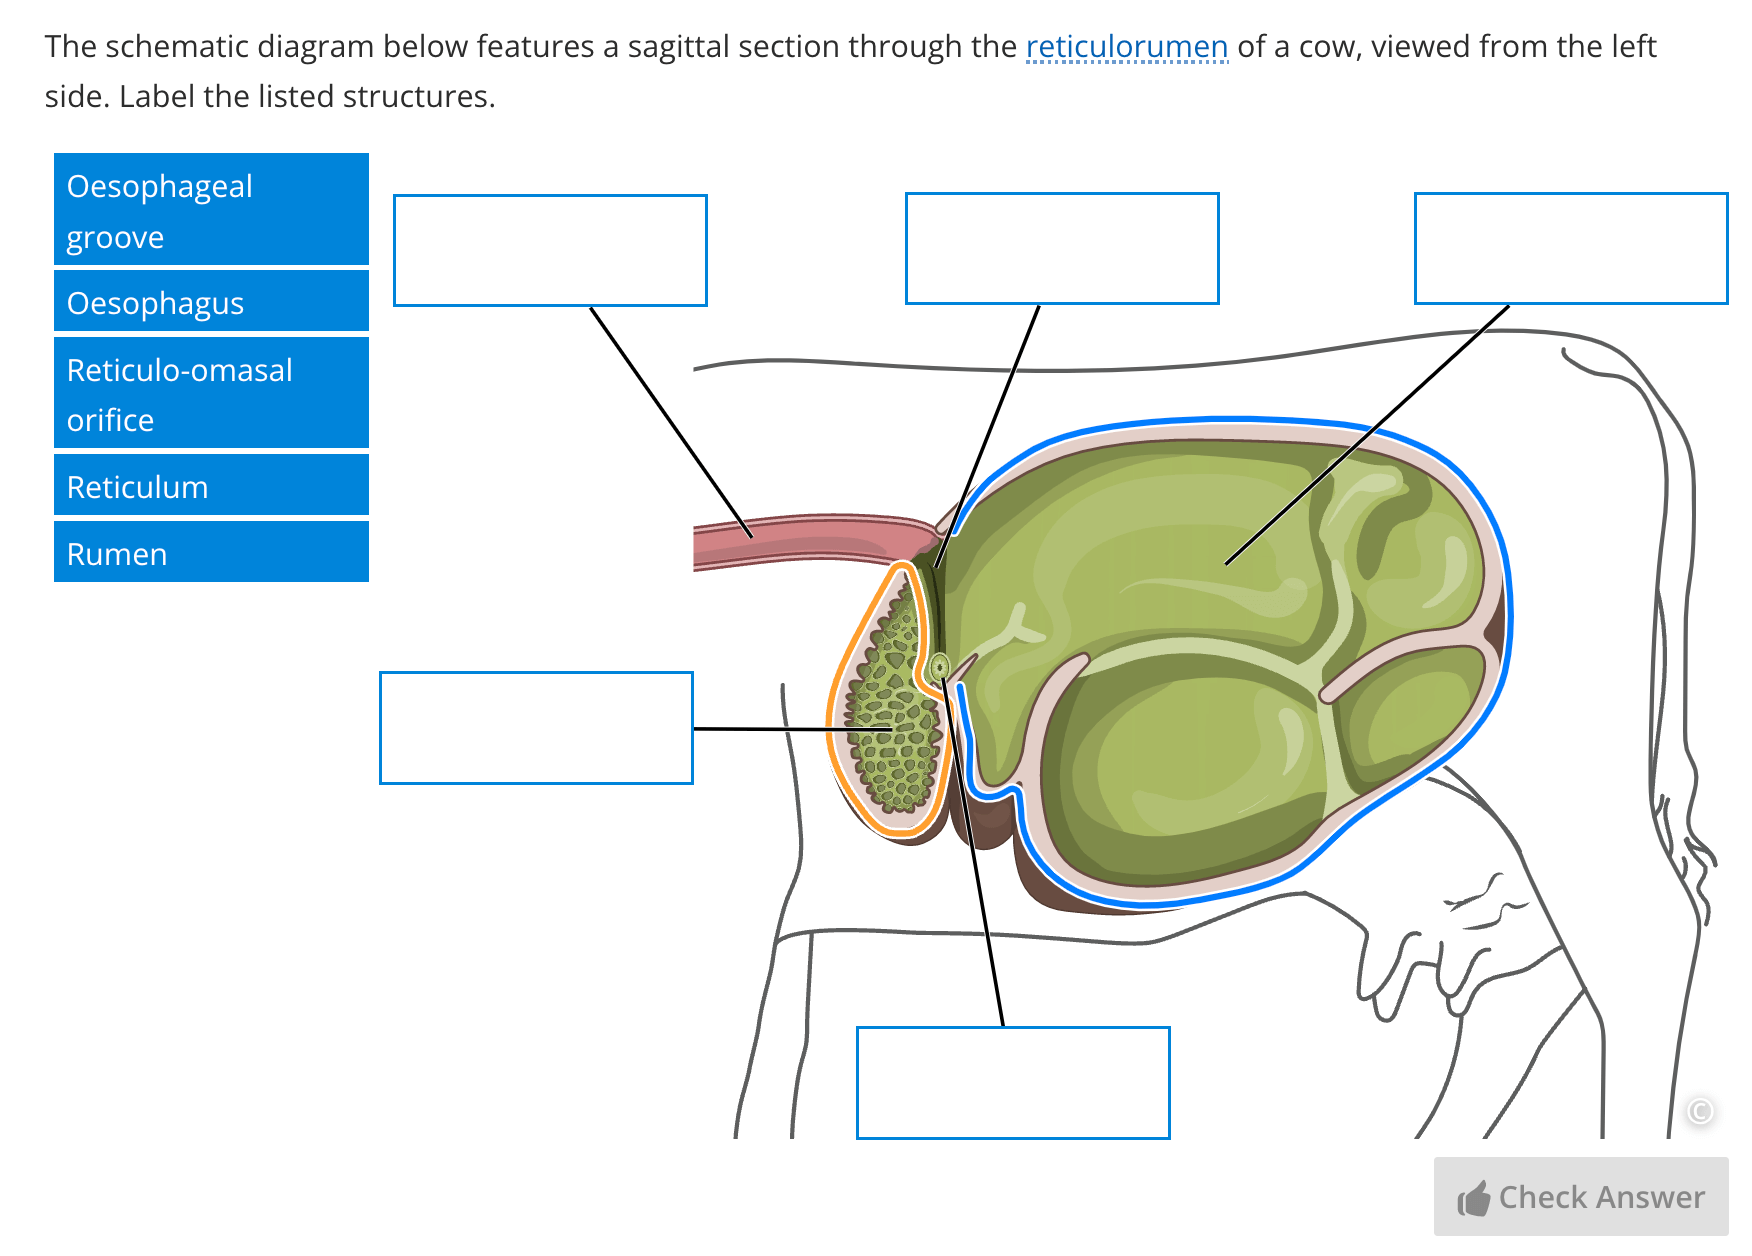 A screenshot of a label image question in Lt which asks students to label structures in a sagittal section through the reticulorumen of a cow.